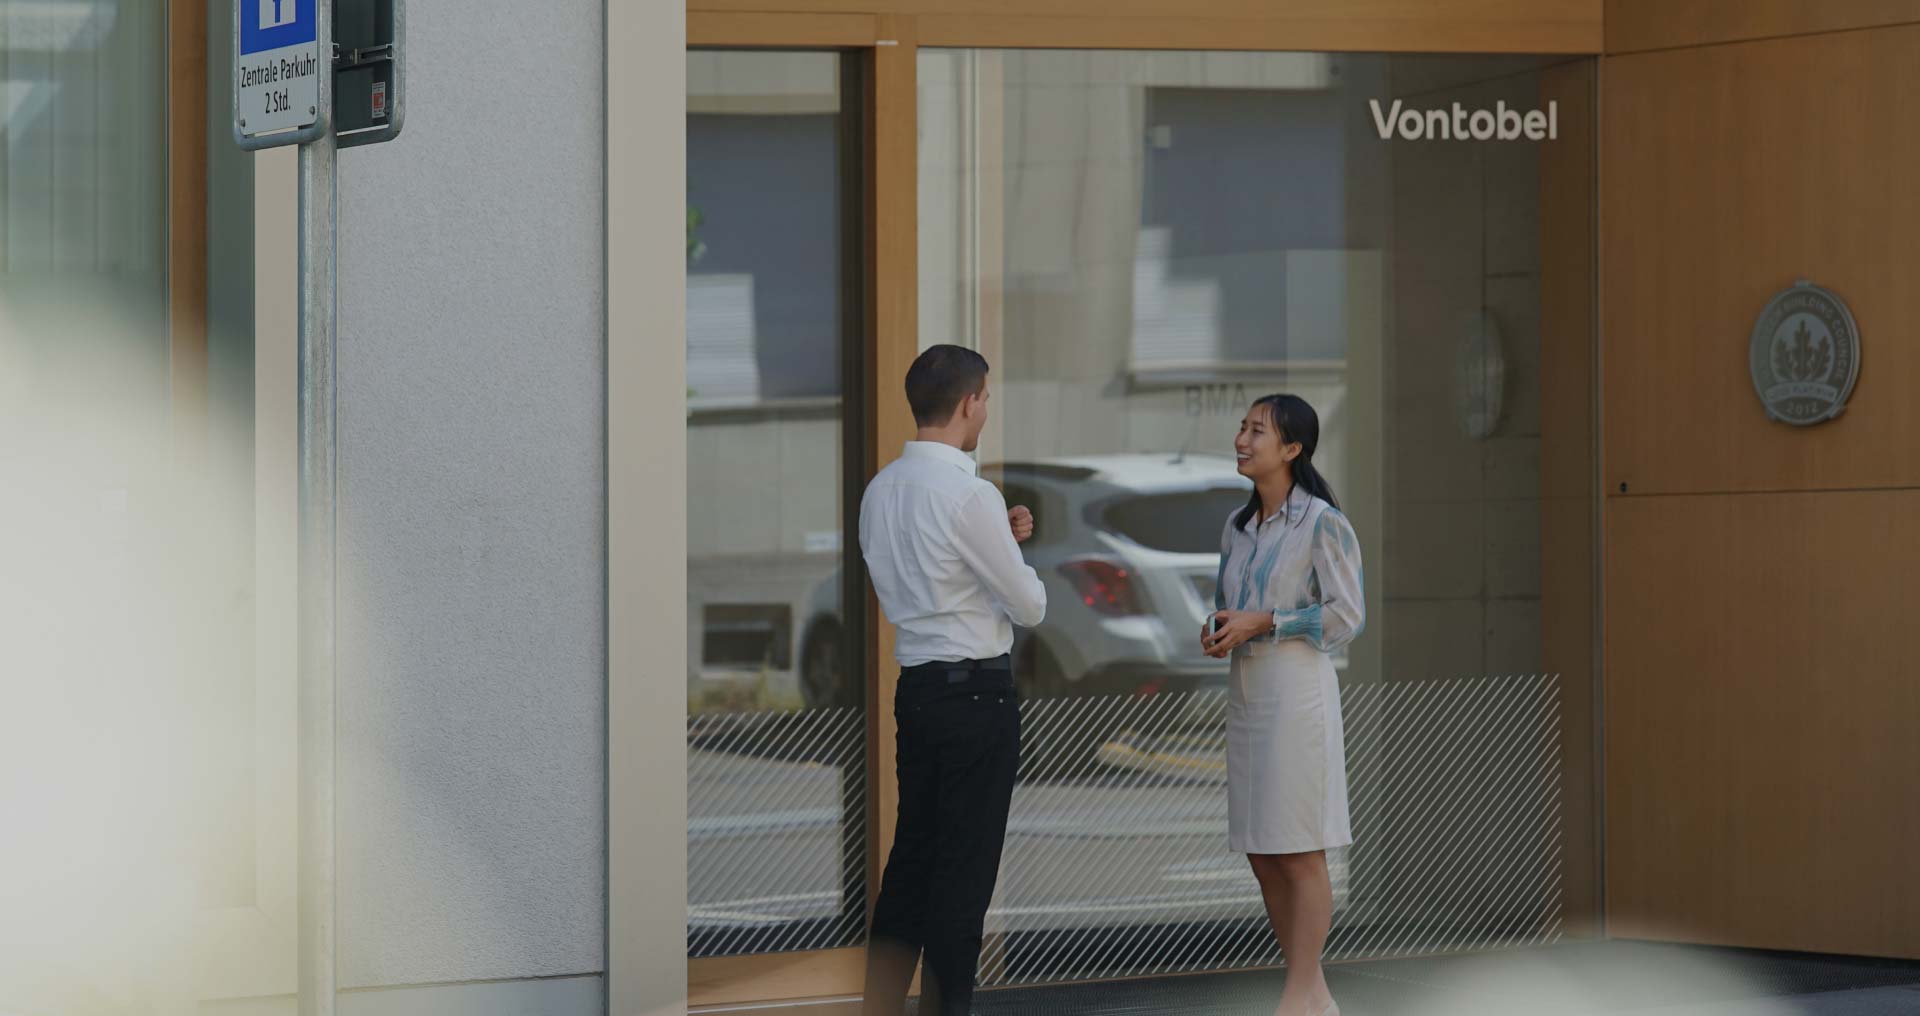 An image of two Vontobel employees talking to each other